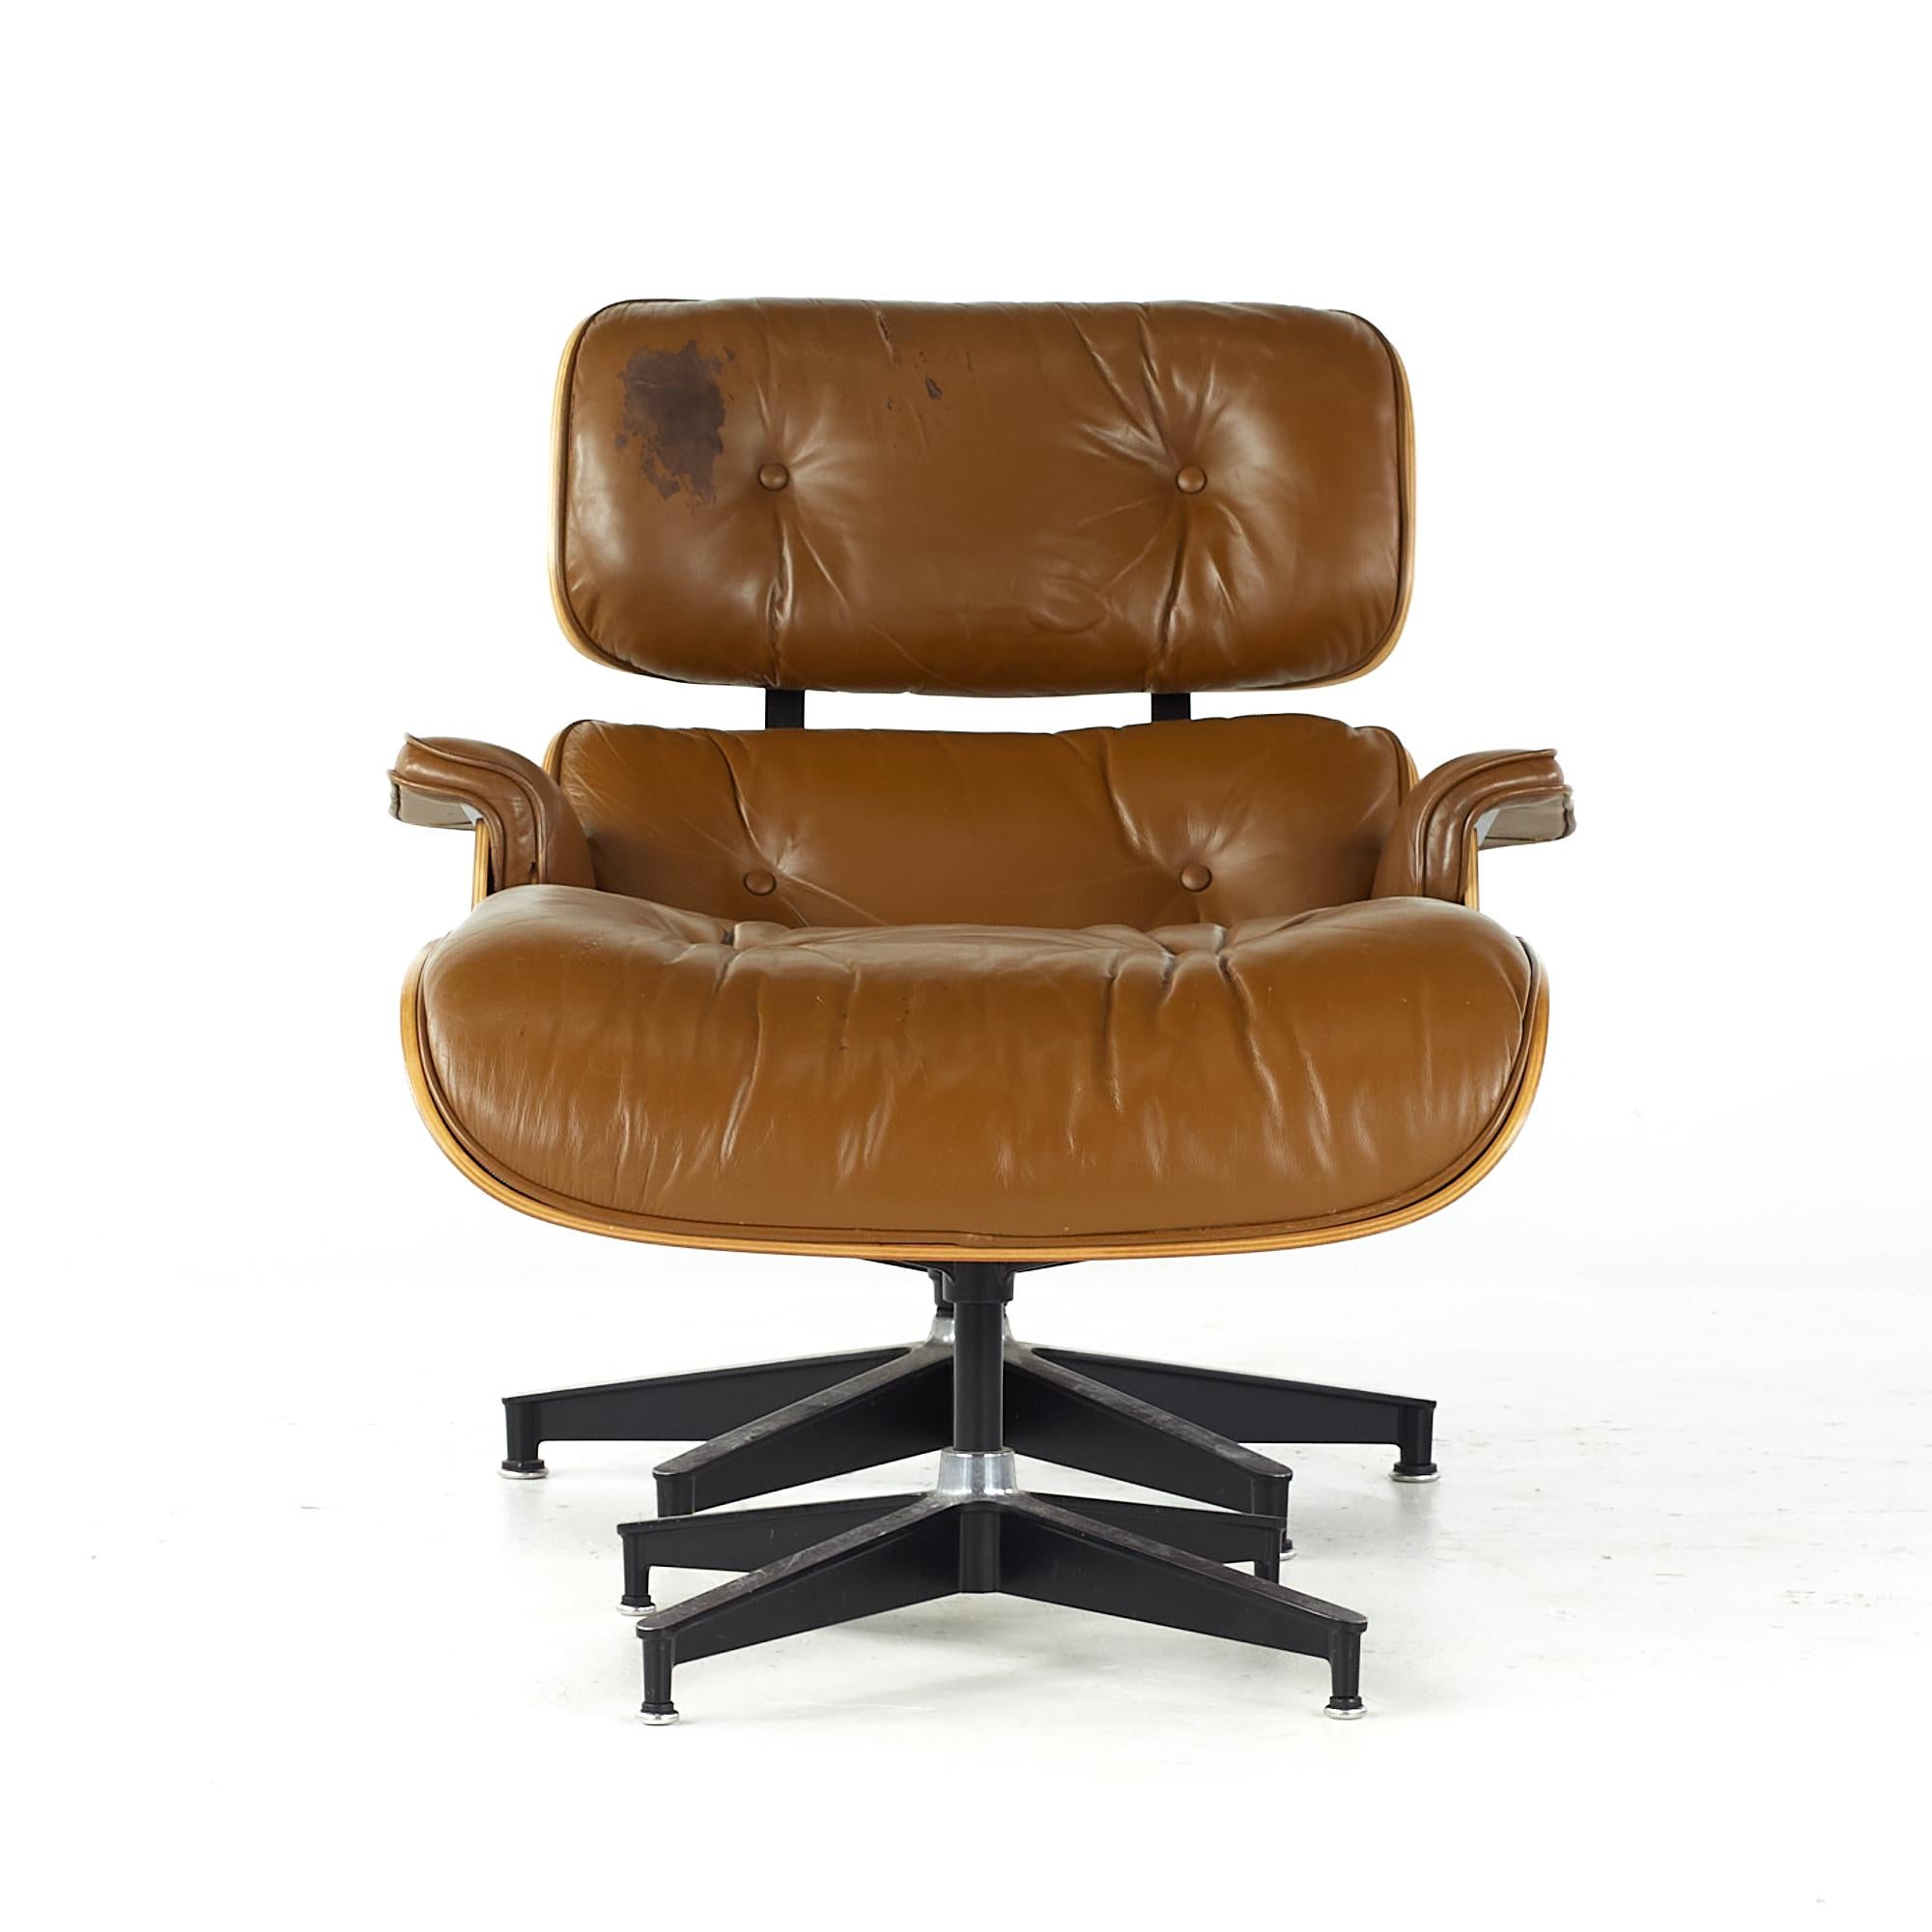 Charles and Ray Eames midcentury Cherry lounge chair and ottoman

The chair measures: 32 wide x 34 deep x 32 high, with a seat height of 15 inches and arm height/chair clearance of 20 inches
The ottoman measures: 25.5 wide x 22 deep x 17.5 inches